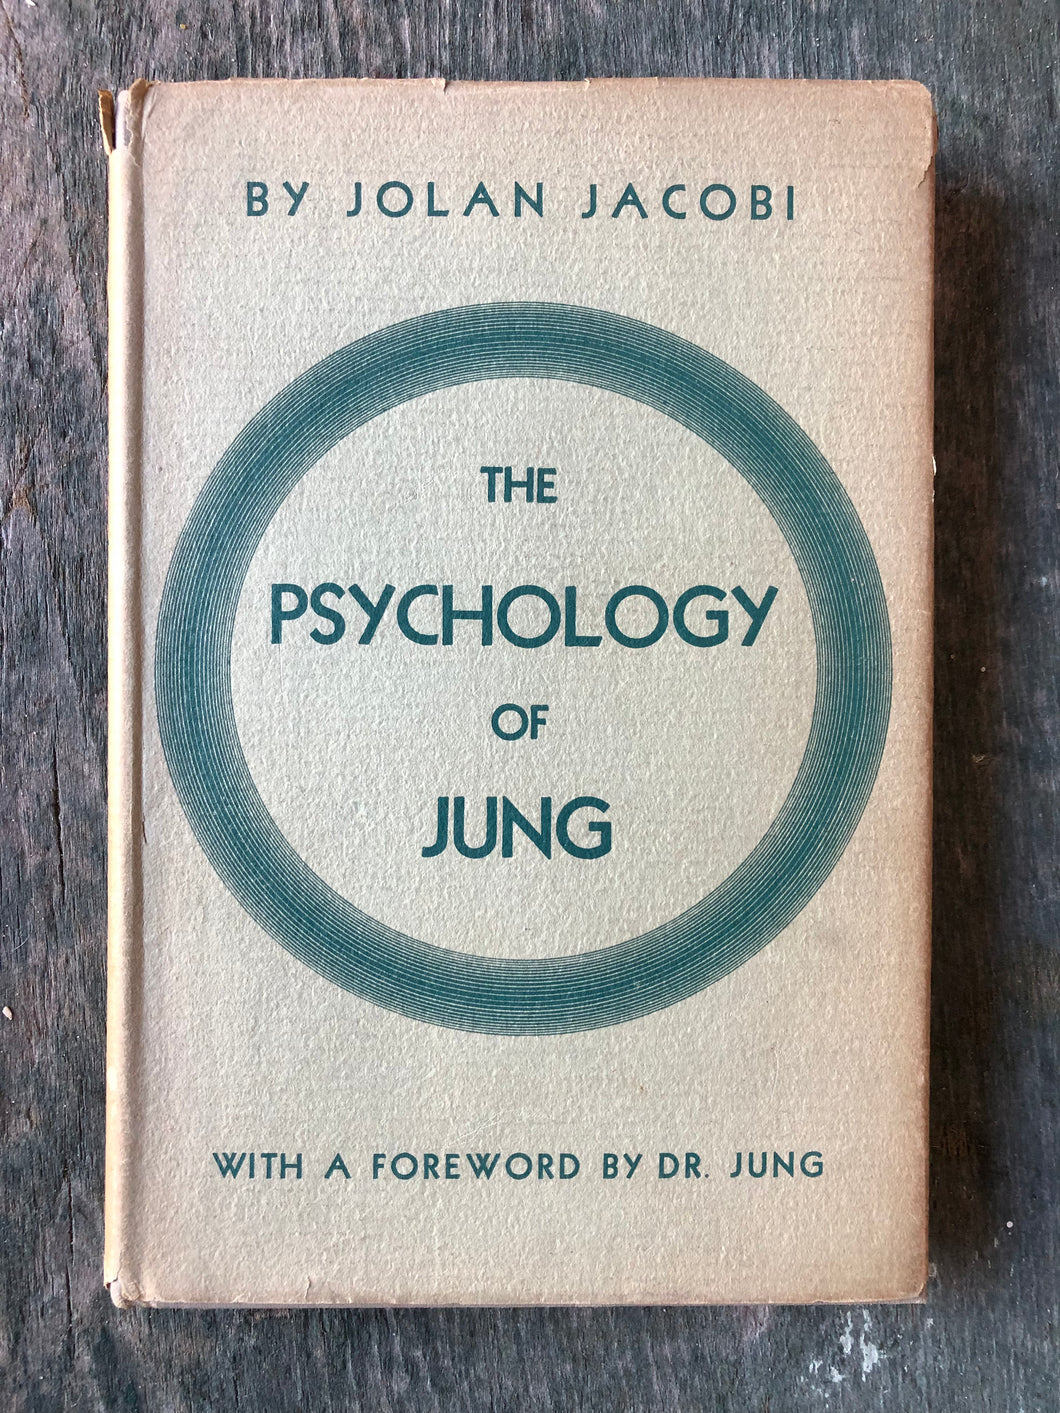 The Psychology of Jung: An Introduction With Illustrations by Jolan Jacobi with a foreword by C. G. Jung